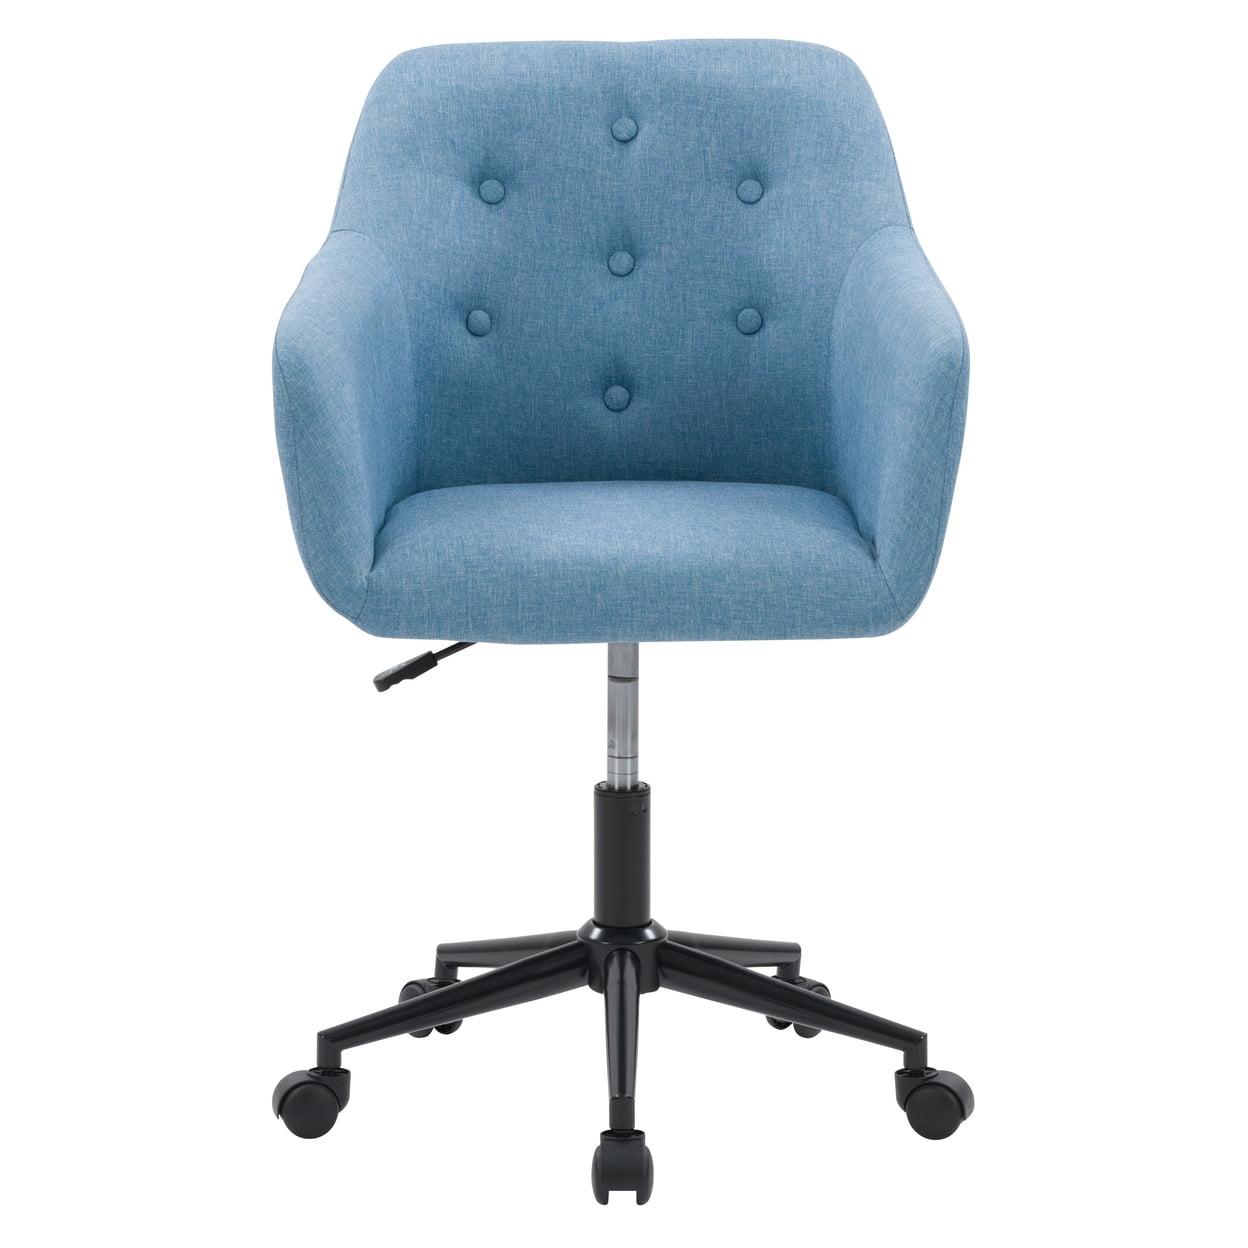 Marlowe 23" Light Blue Woven Fabric Button-Tufted Task Chair